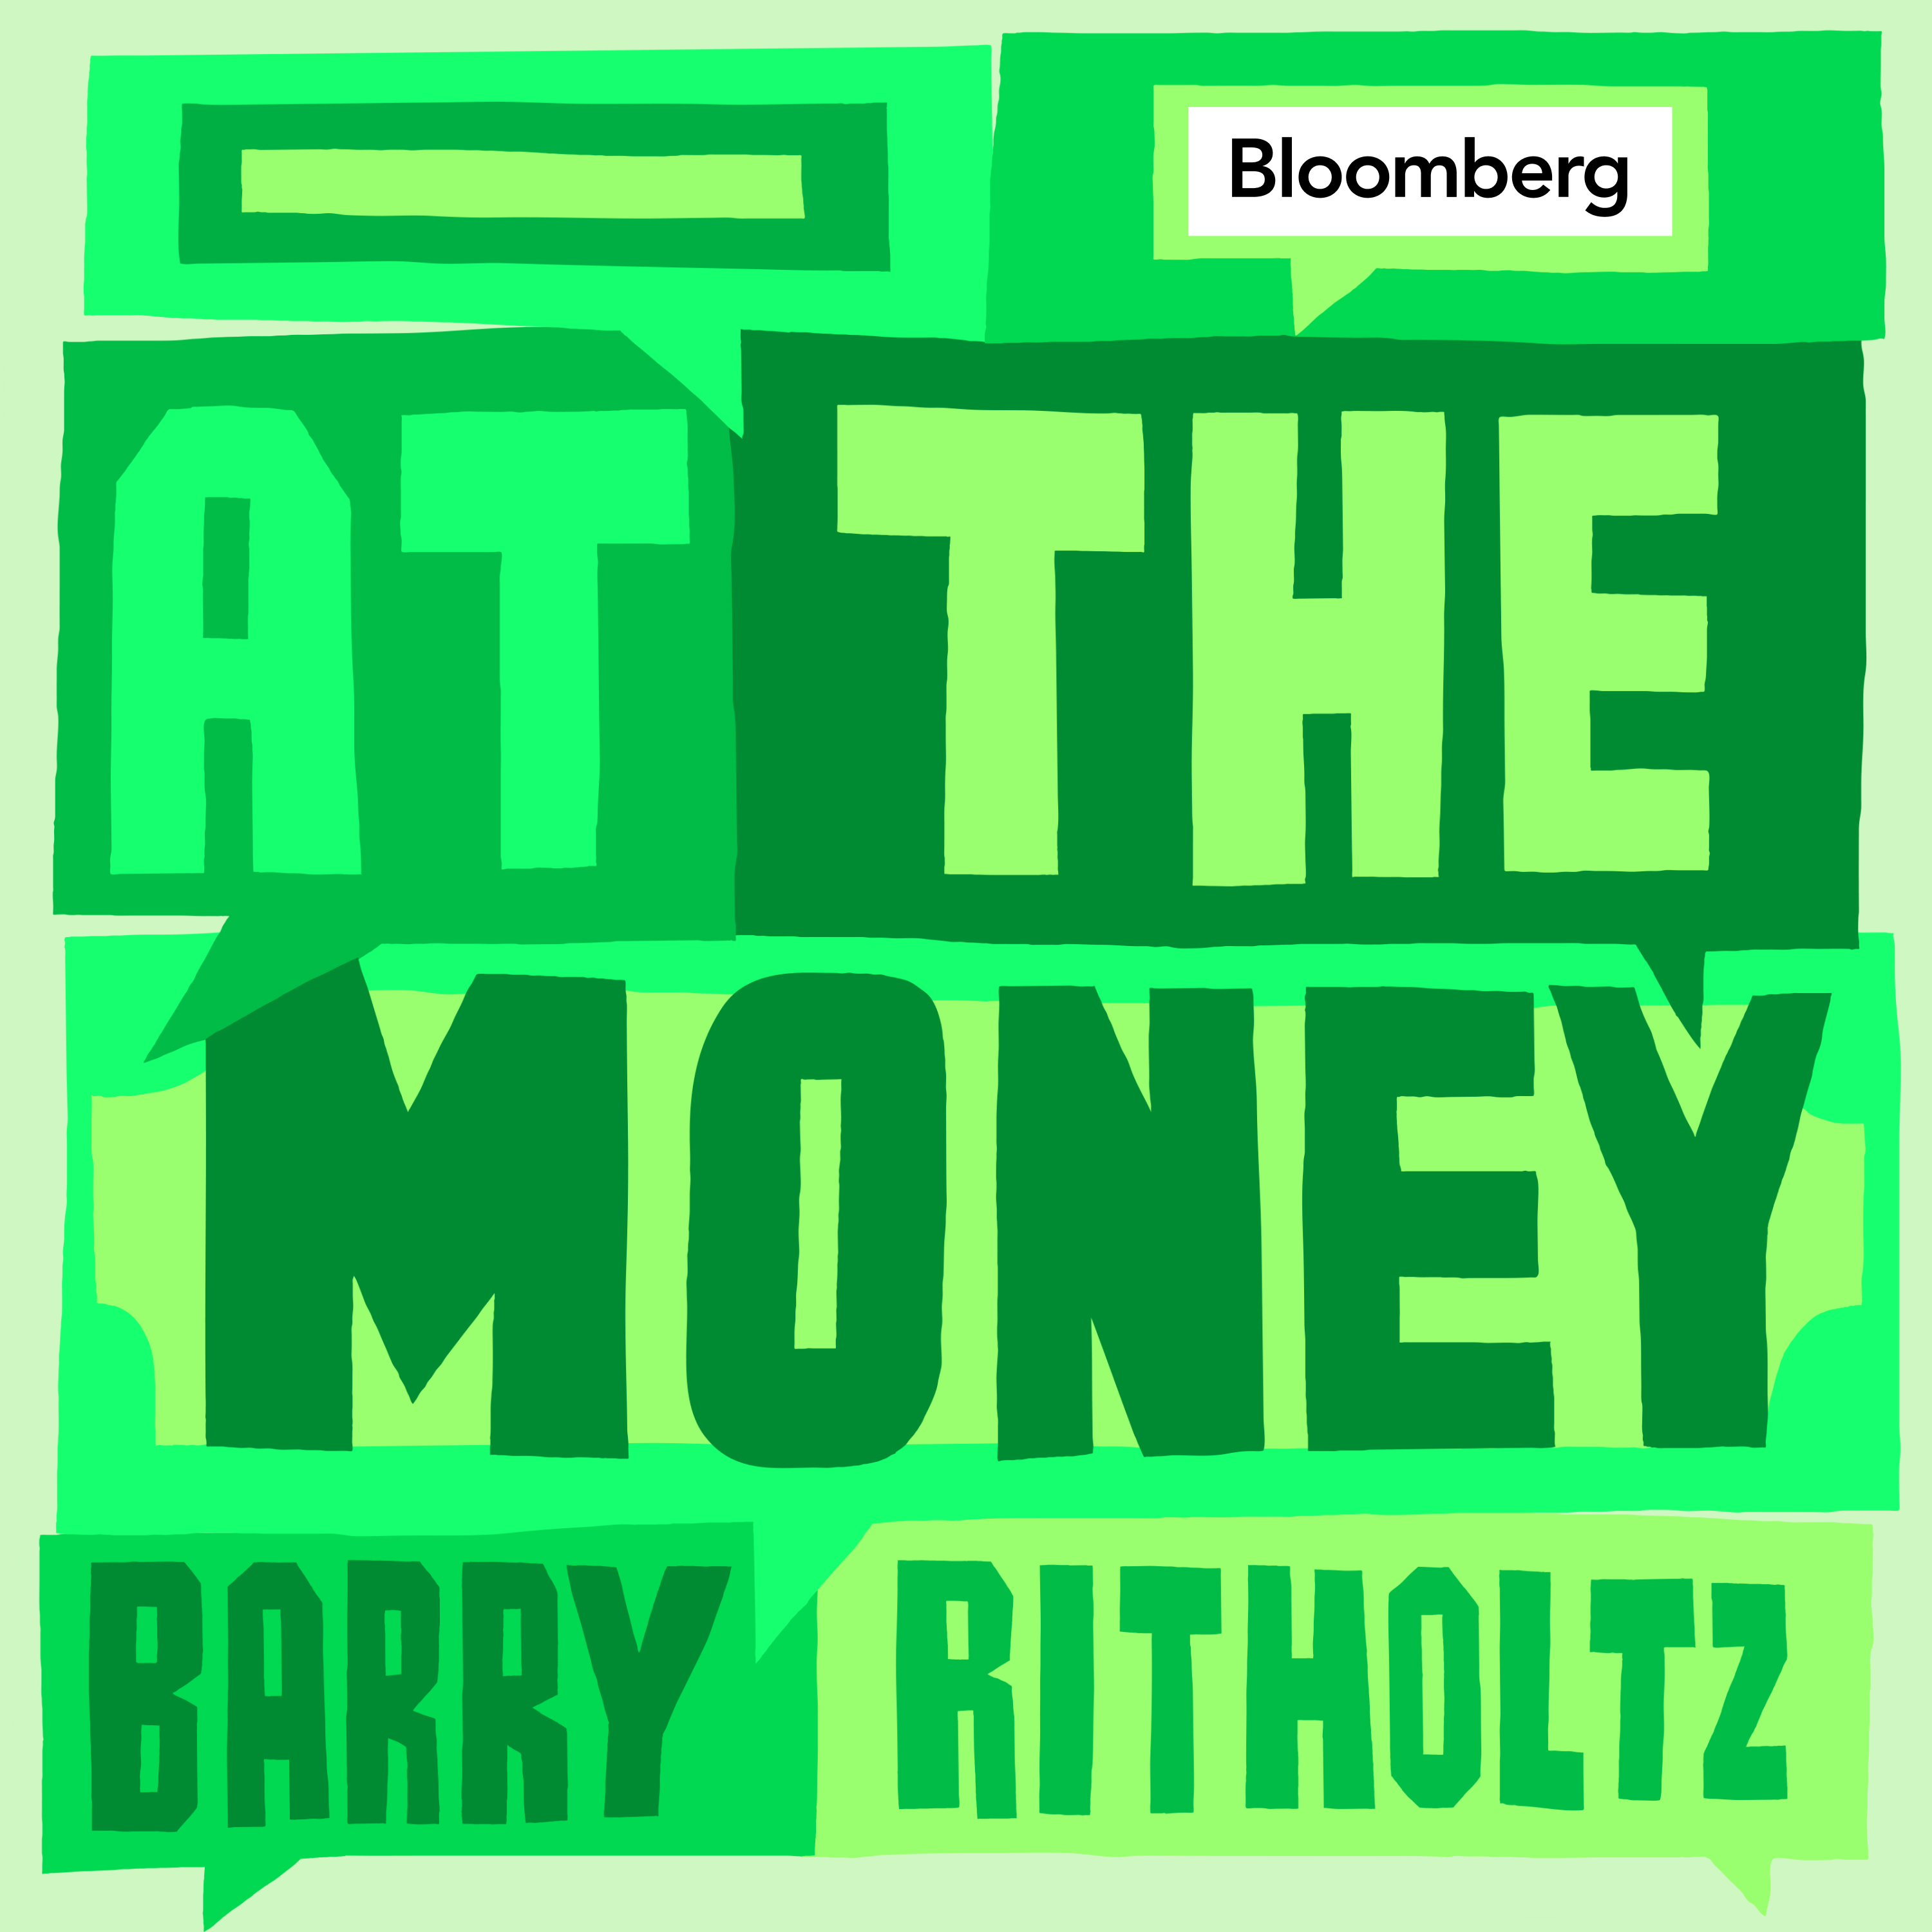 At The Money: When Your Investments Make an Impact